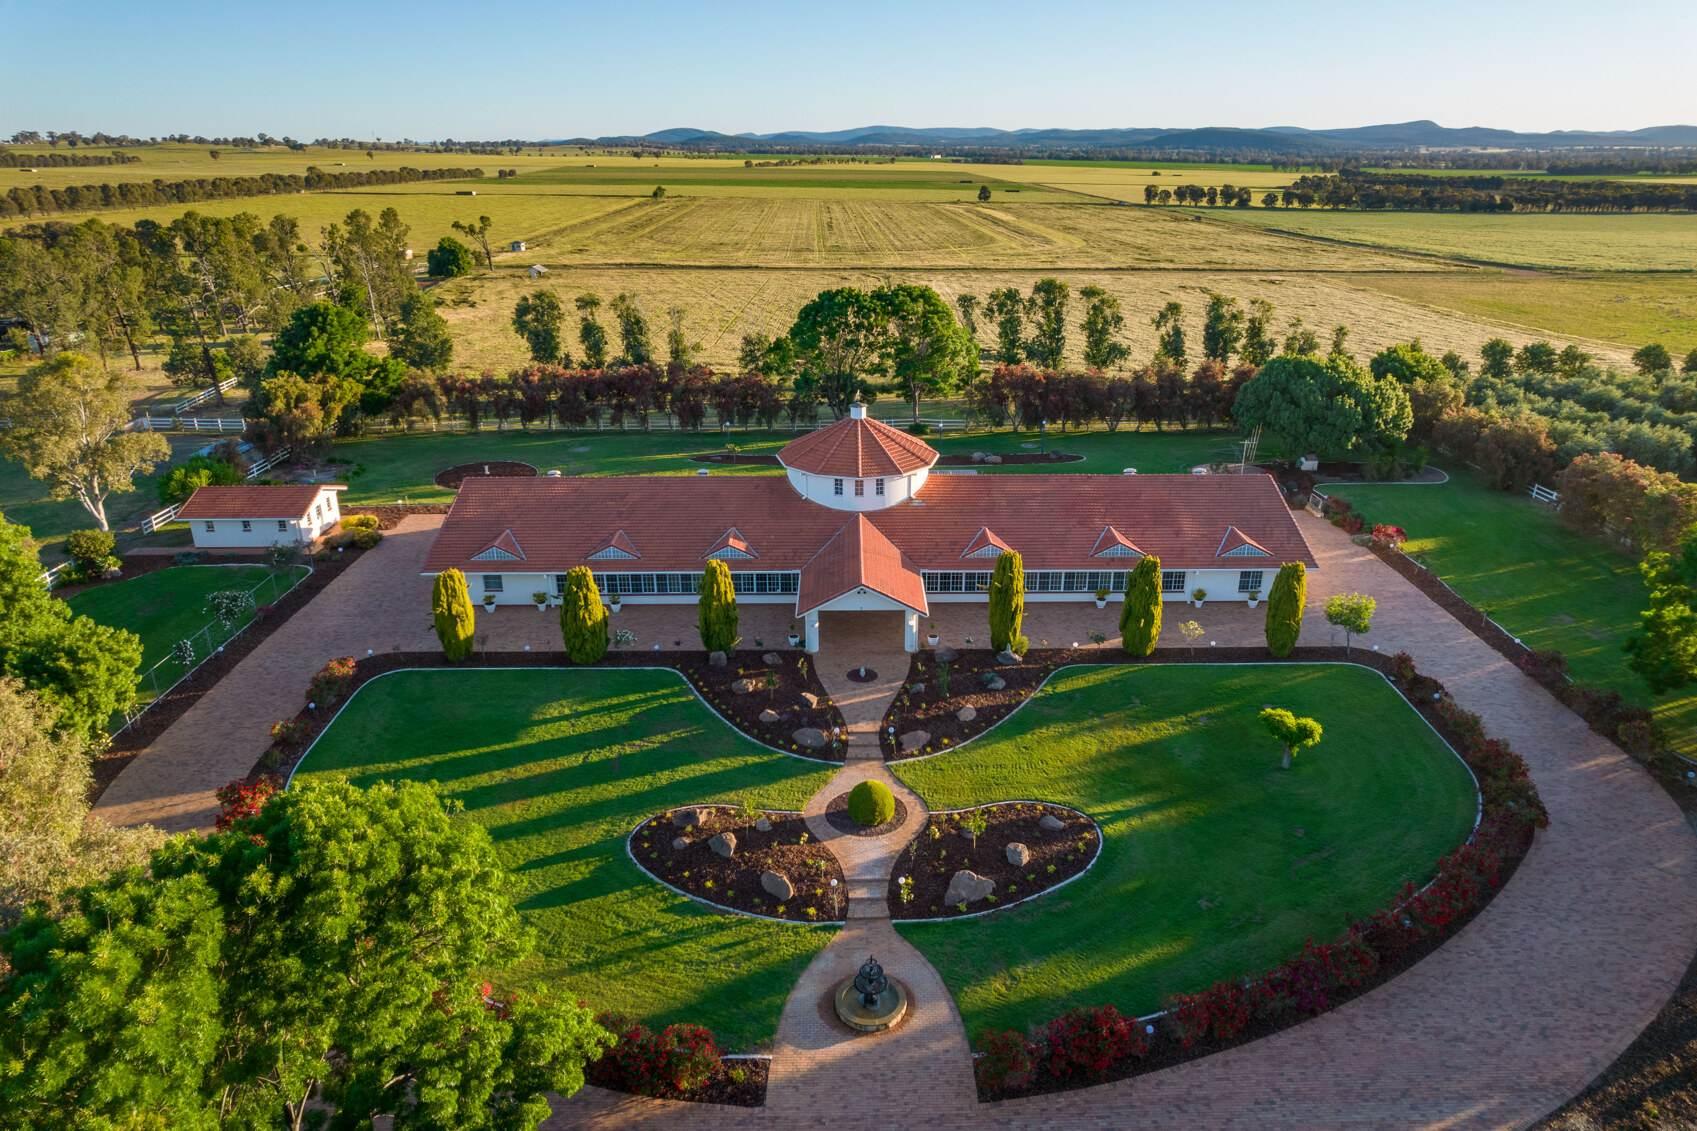 Surrounding the main residence of this rural property for sale NSW is an orchard comprising almonds, cherries, pomegranates, vineyard and more than 300 olive tree